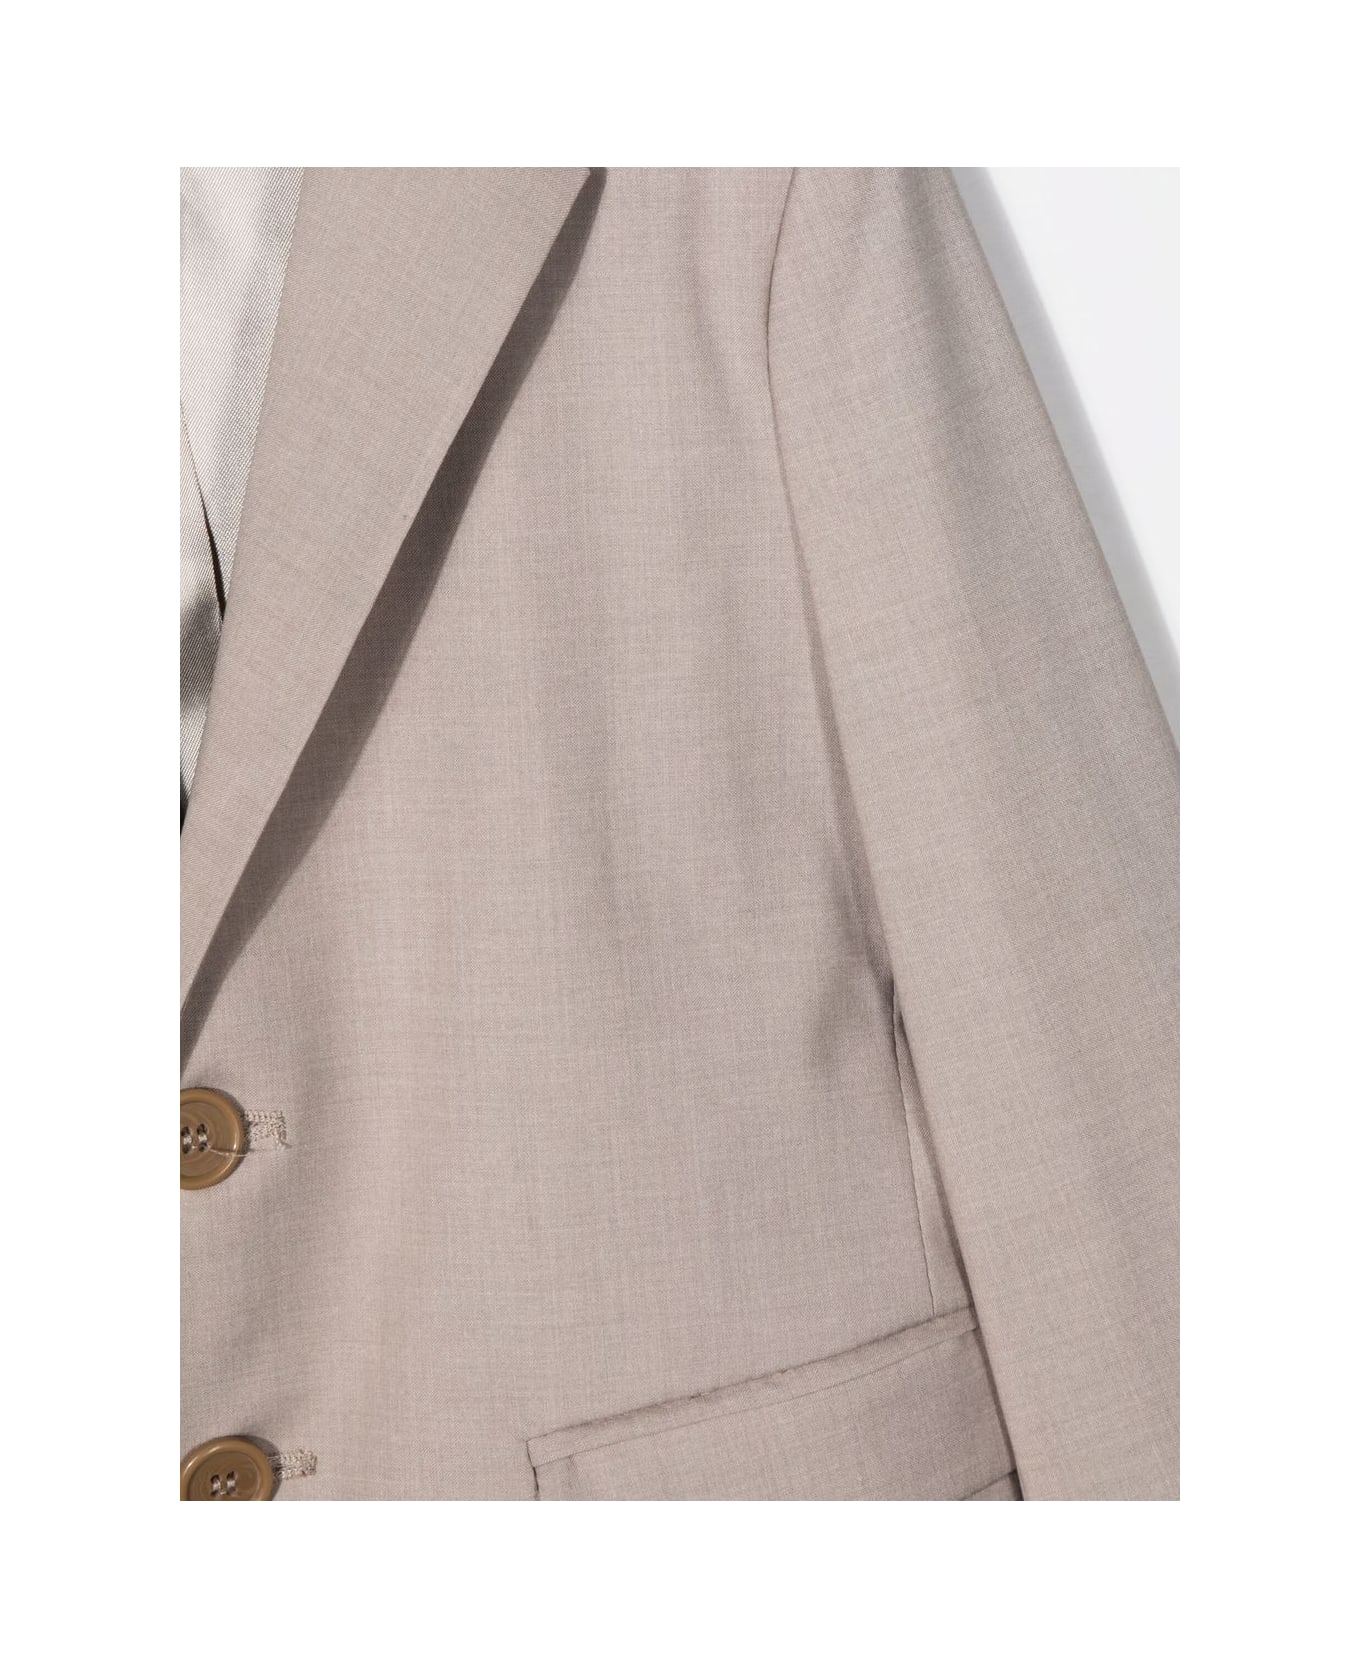 Paolo Pecora Single-breasted Fitted Blazer - Brown